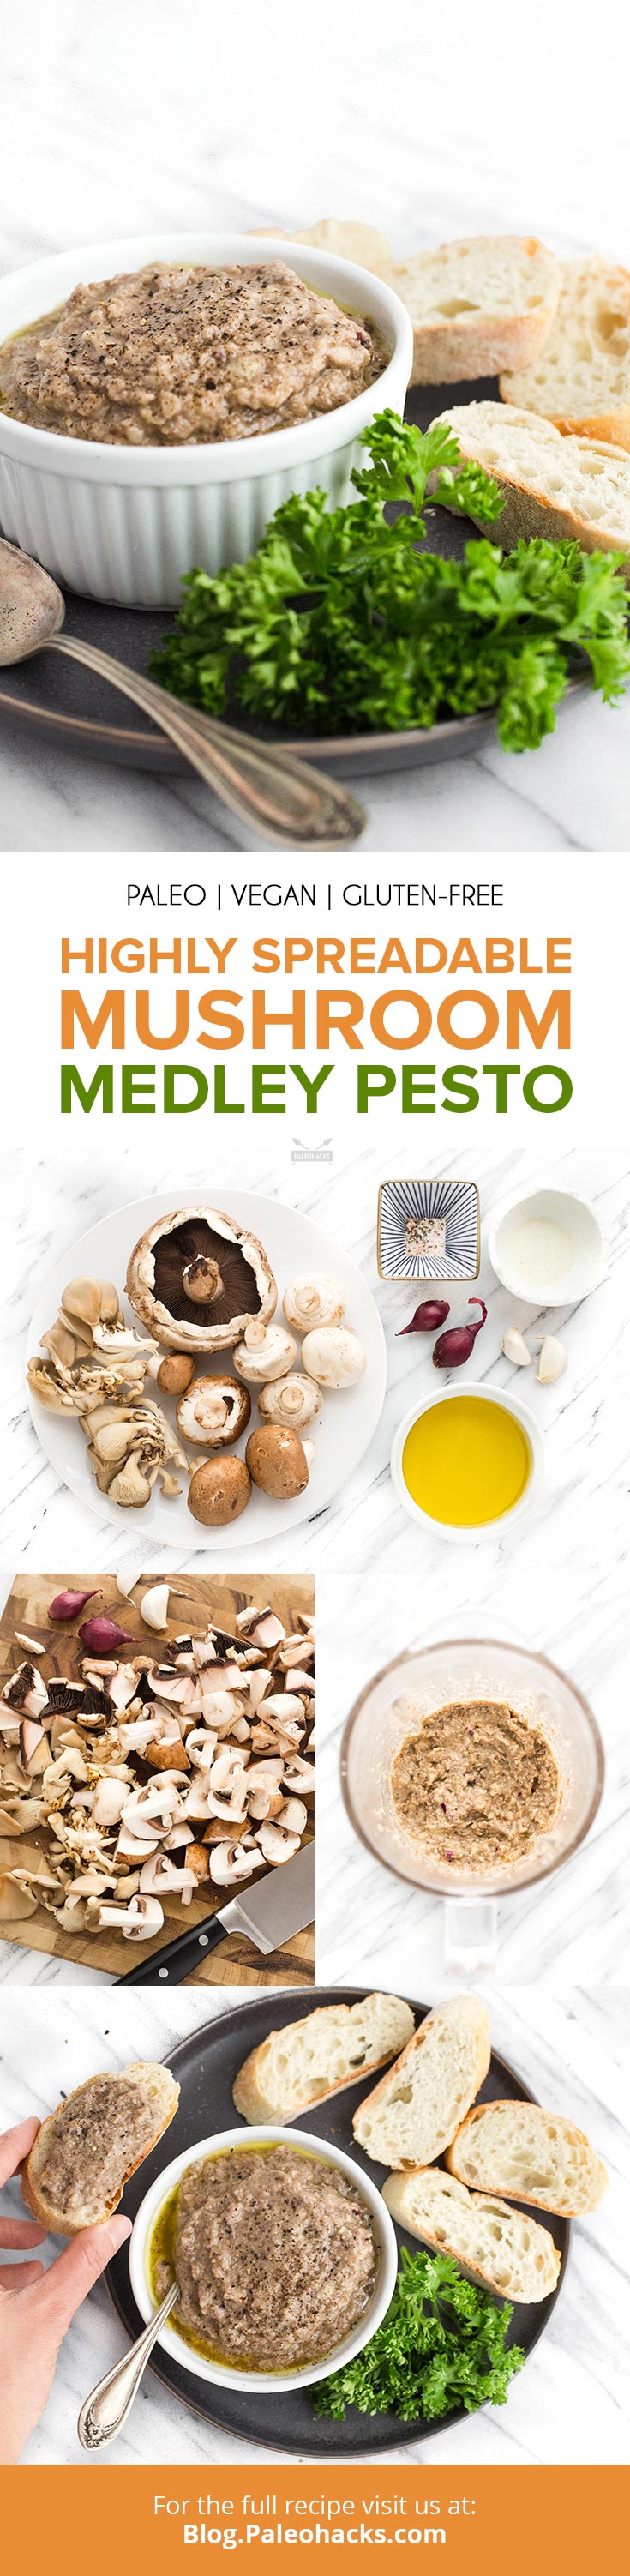 Pair this mushroom pesto with your favorite Paleo snacks for a spread made in vegan heaven. Is there anything mushrooms can't do?